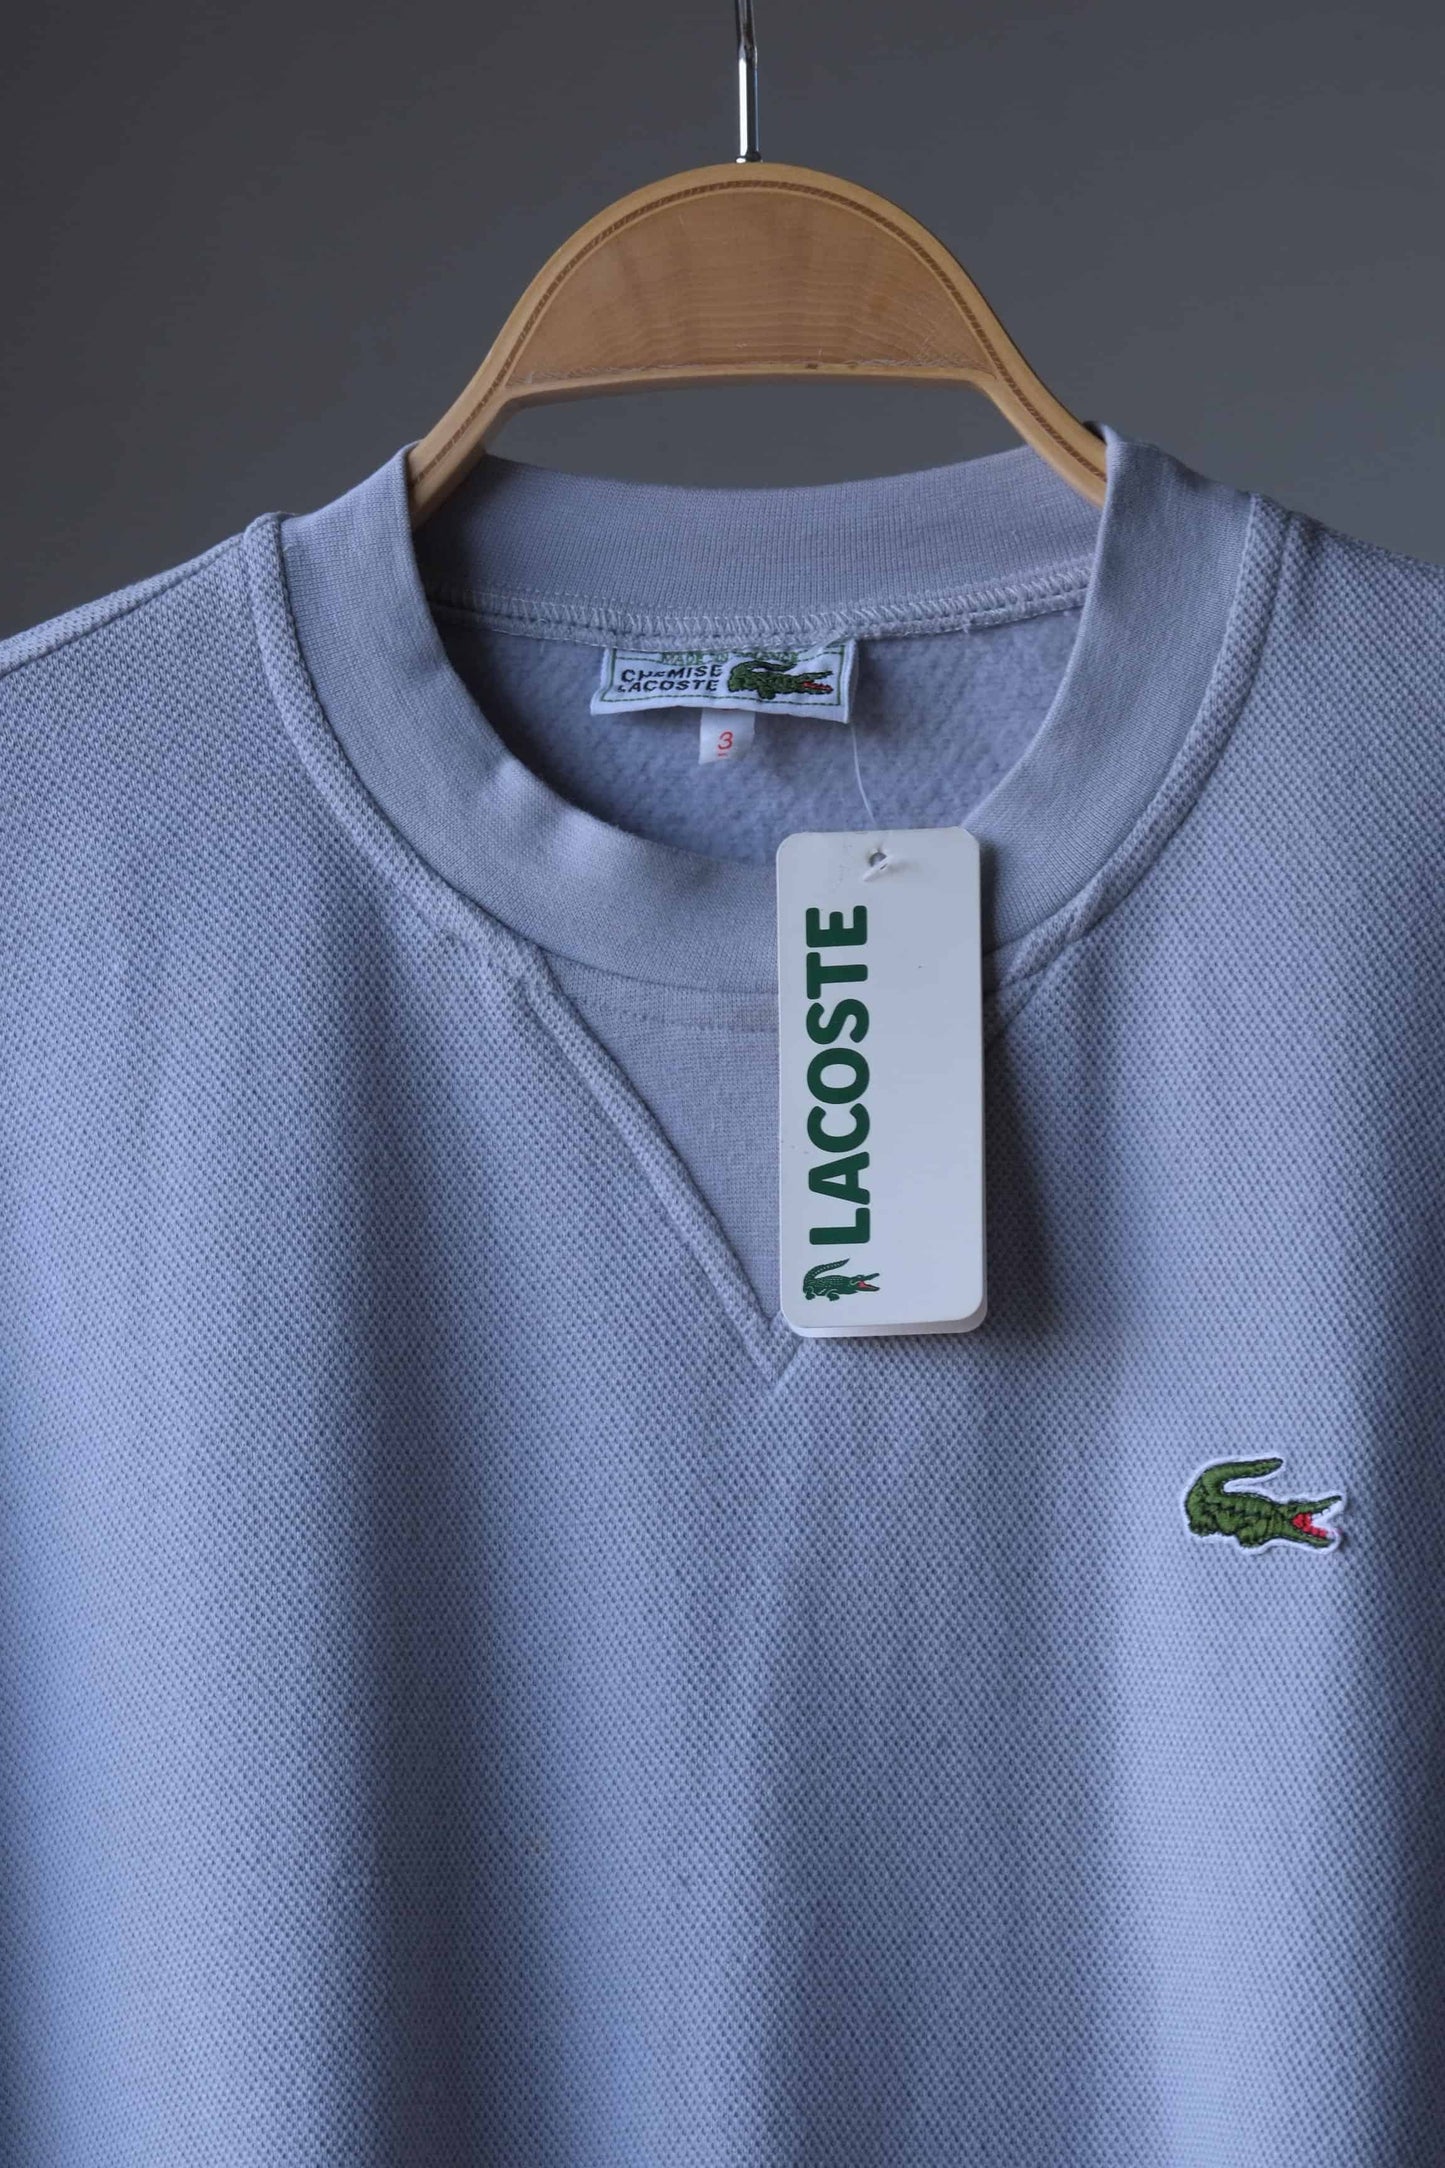 close up of Gray Lacoste 90s sweatshirt on hanger showing the tag